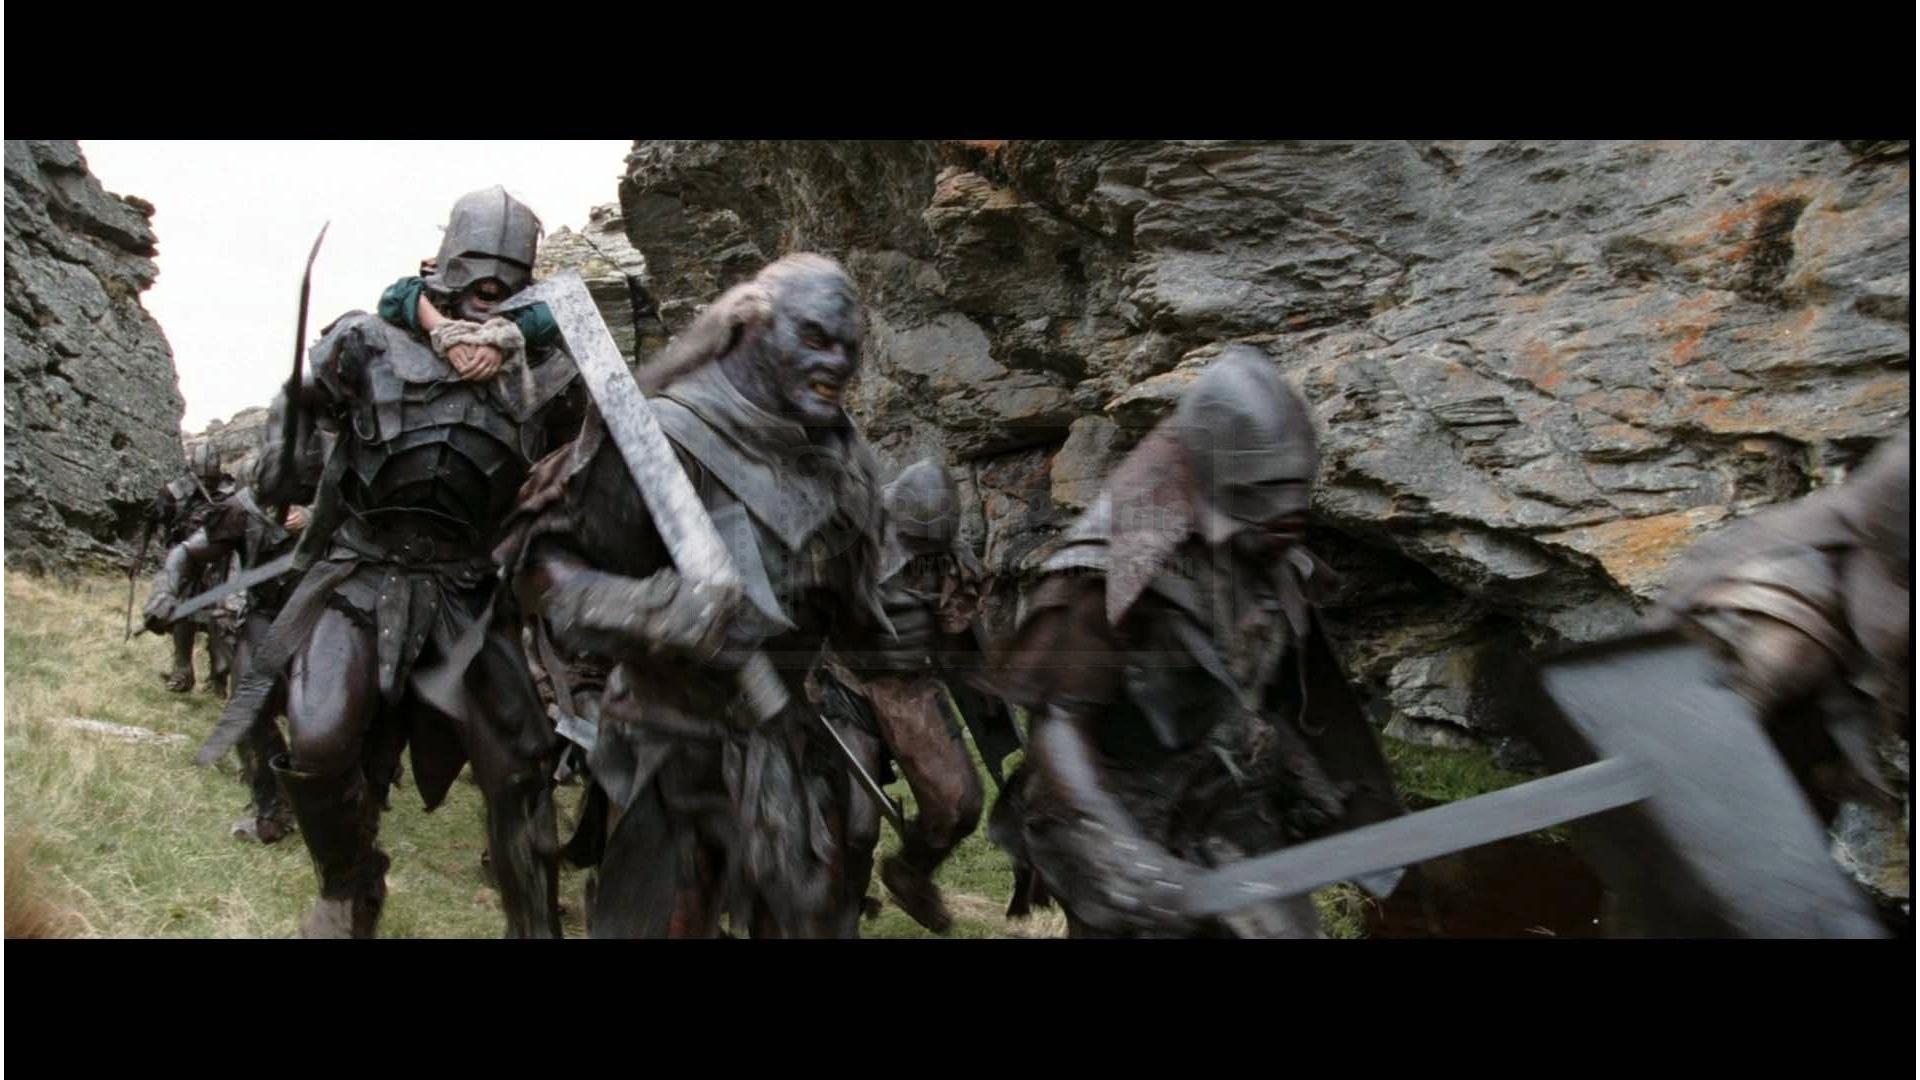 Uruk Hai Sword Lord Of The Rings: The Fellowship Of The Ring